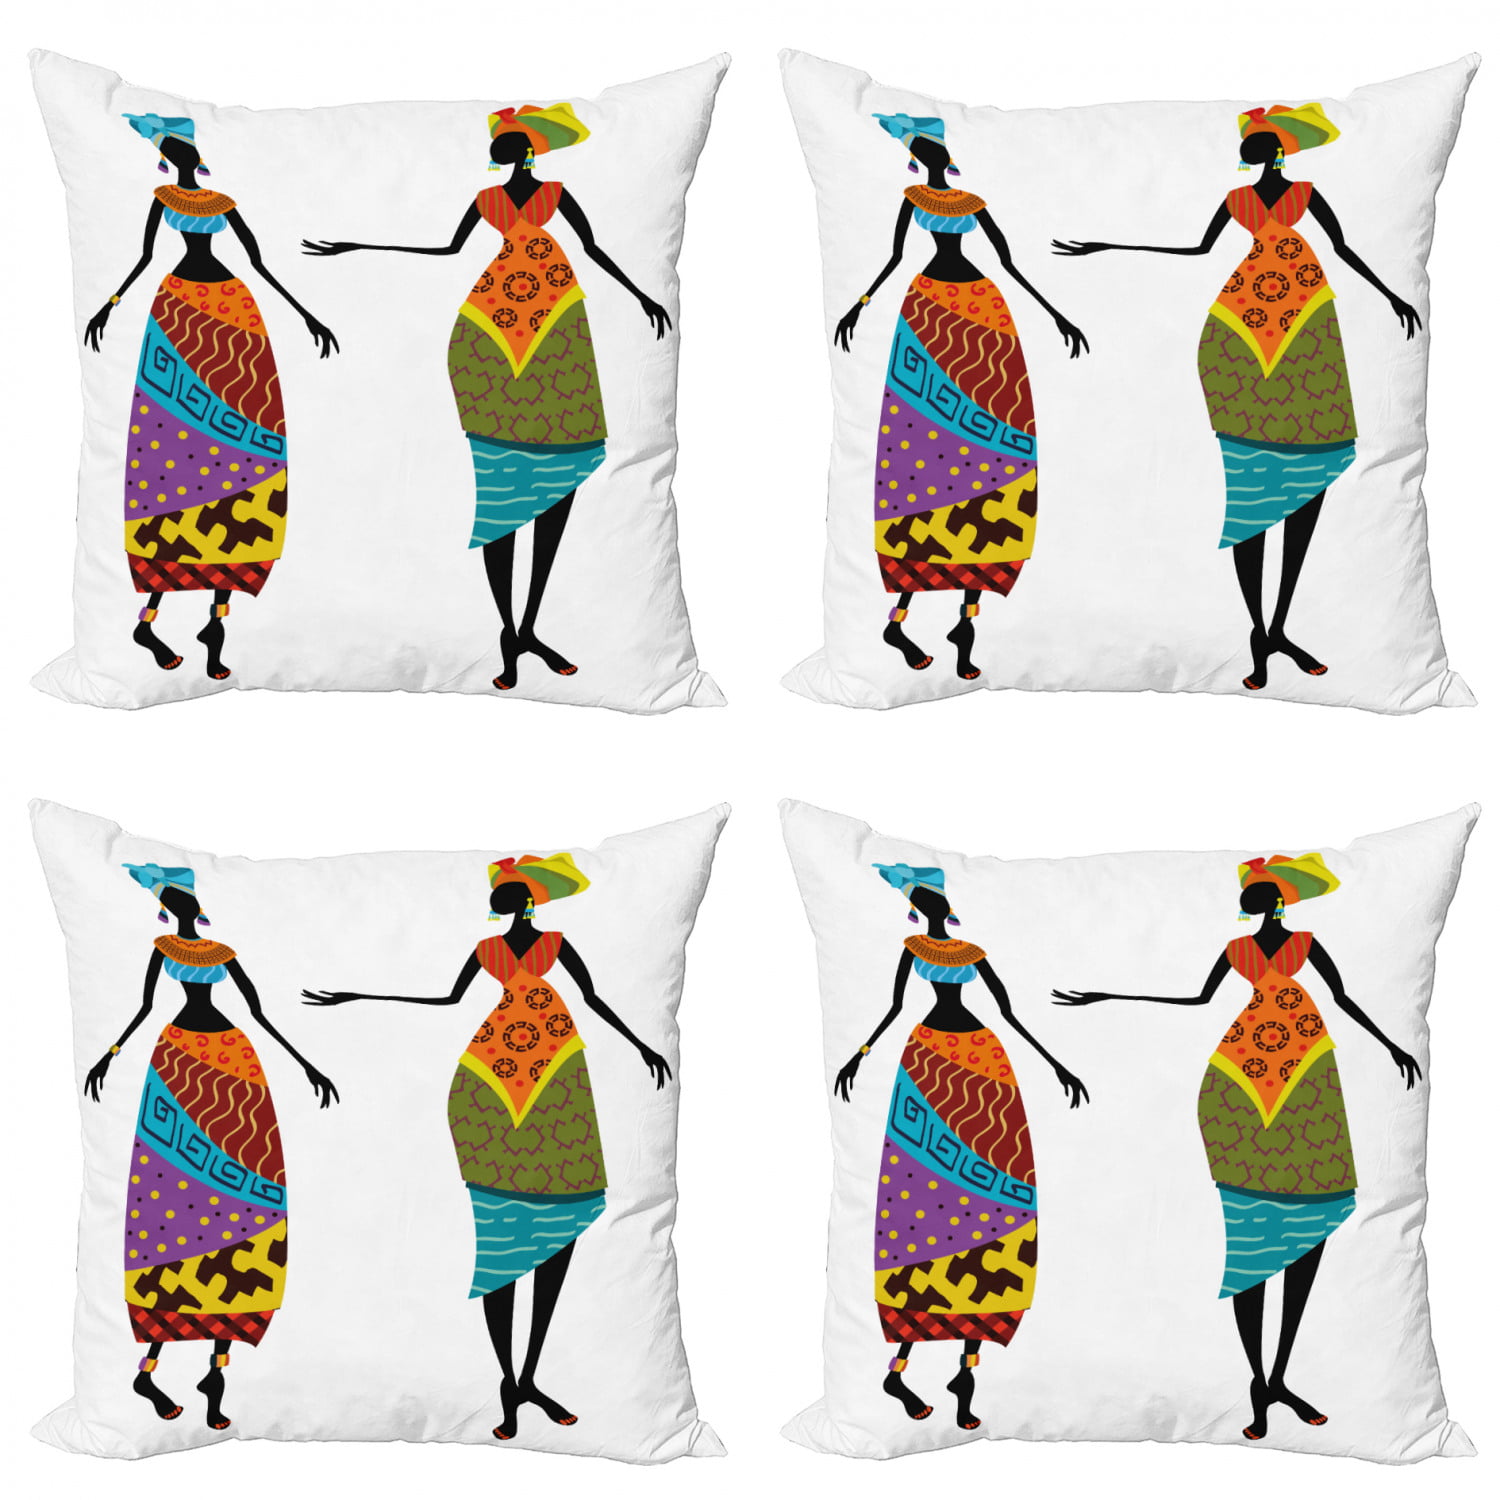 Burlap African Costume Clipart Throw Pillow Cover Ethnic Tribe Lady Cushion Case 